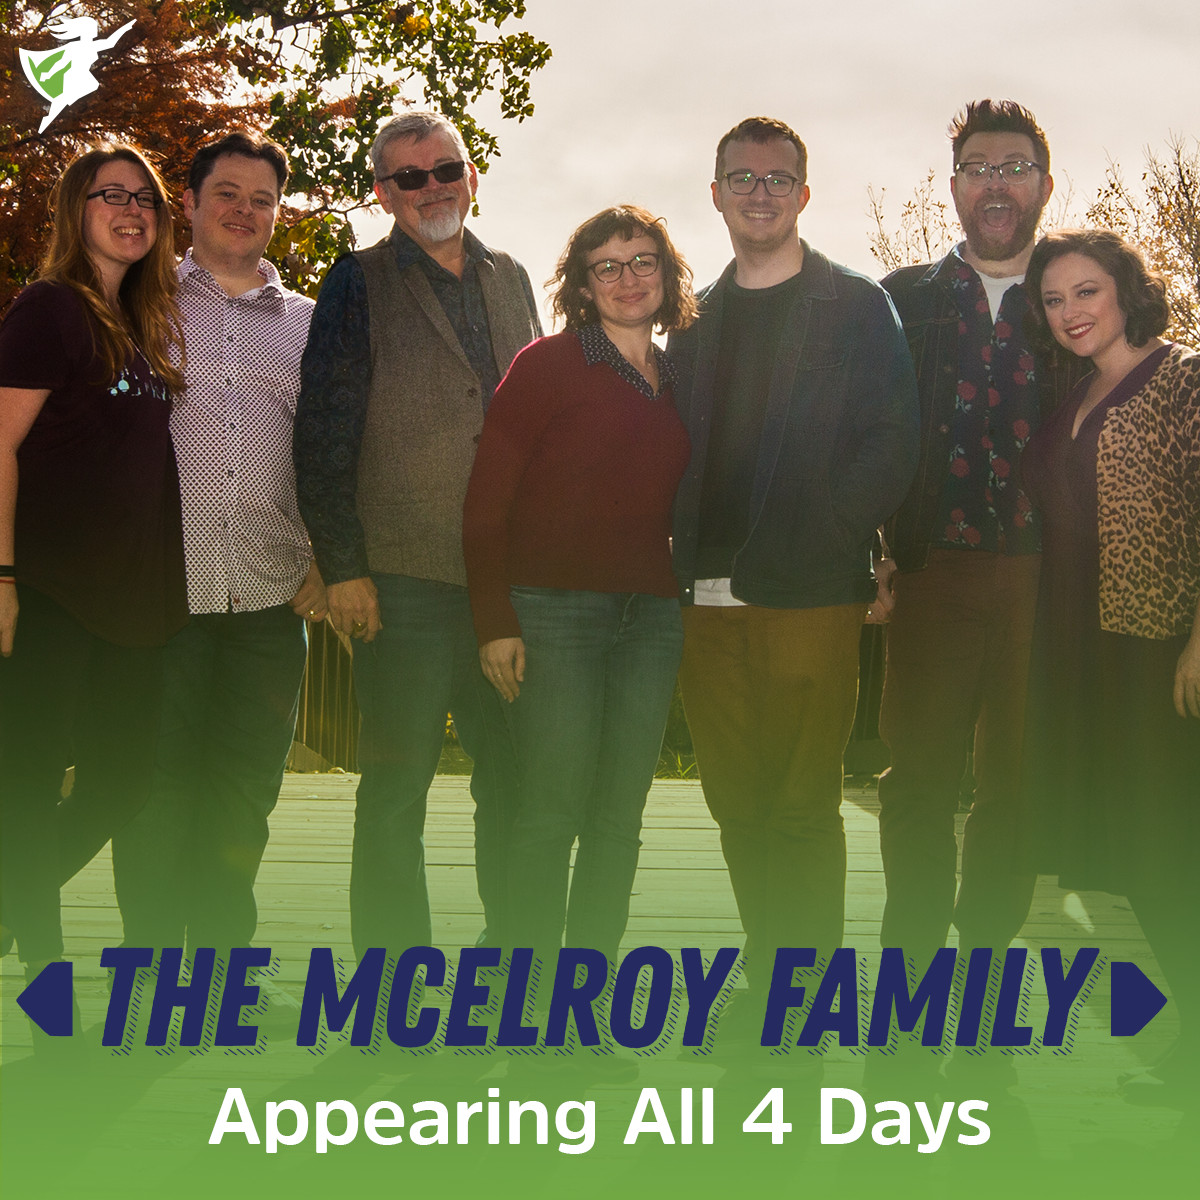 A photo of the McElroy family, left to right Sydnee, Justin, Clint, Rachel, Griffin, Travis, and Teresa. At the bottom of the photo text reads “THE MCELROY FAMILY Appearing All 4 Days”. The ECCC logo is in the top left corner.